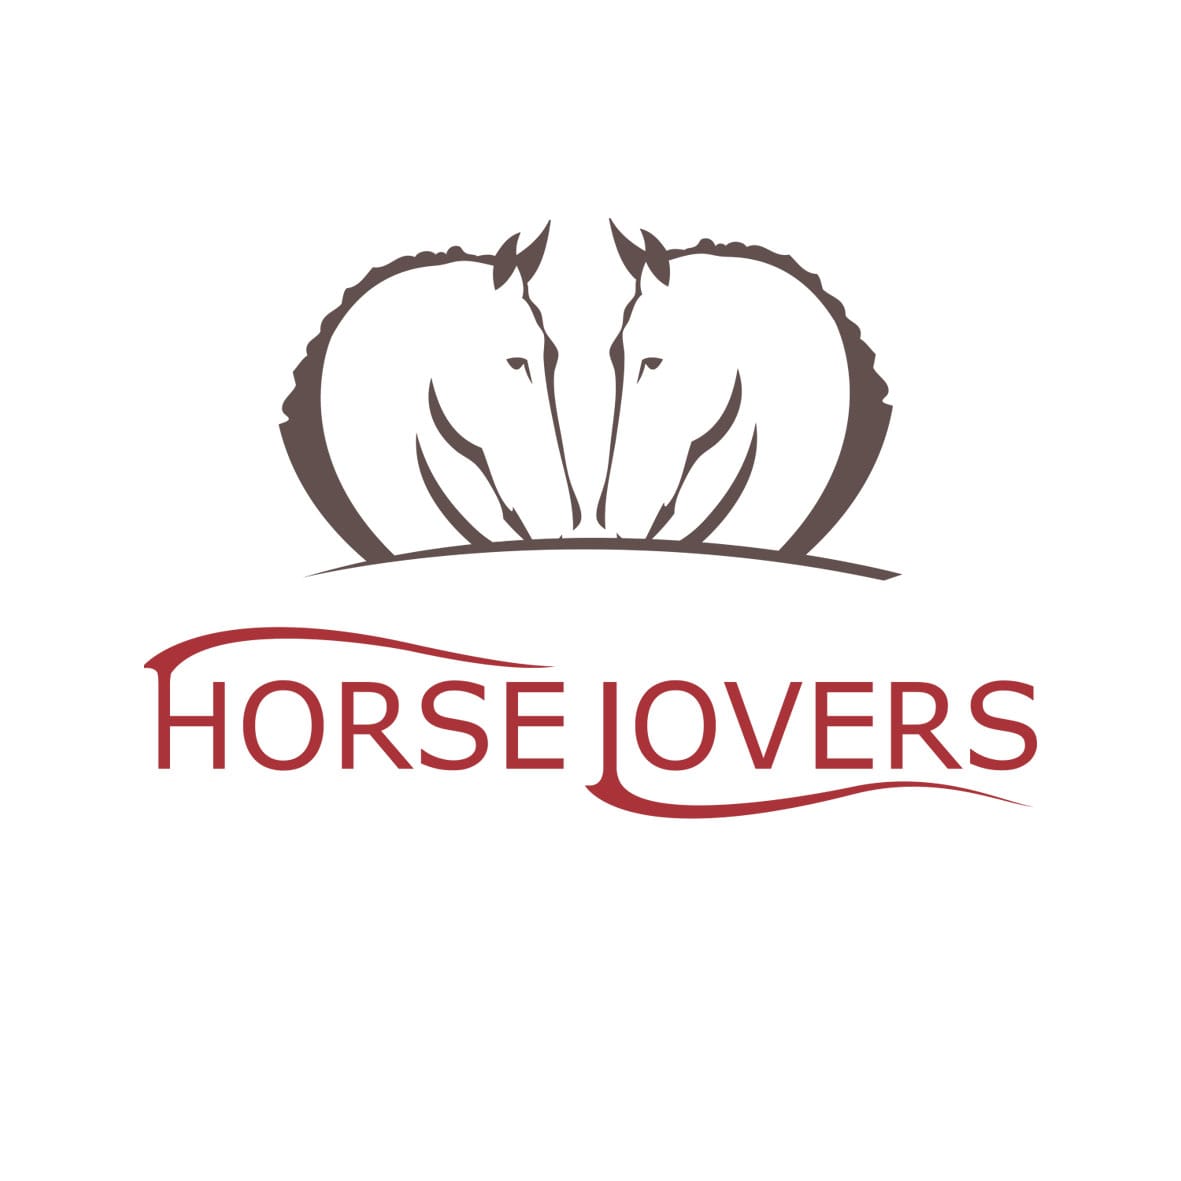 HORSELOVERS